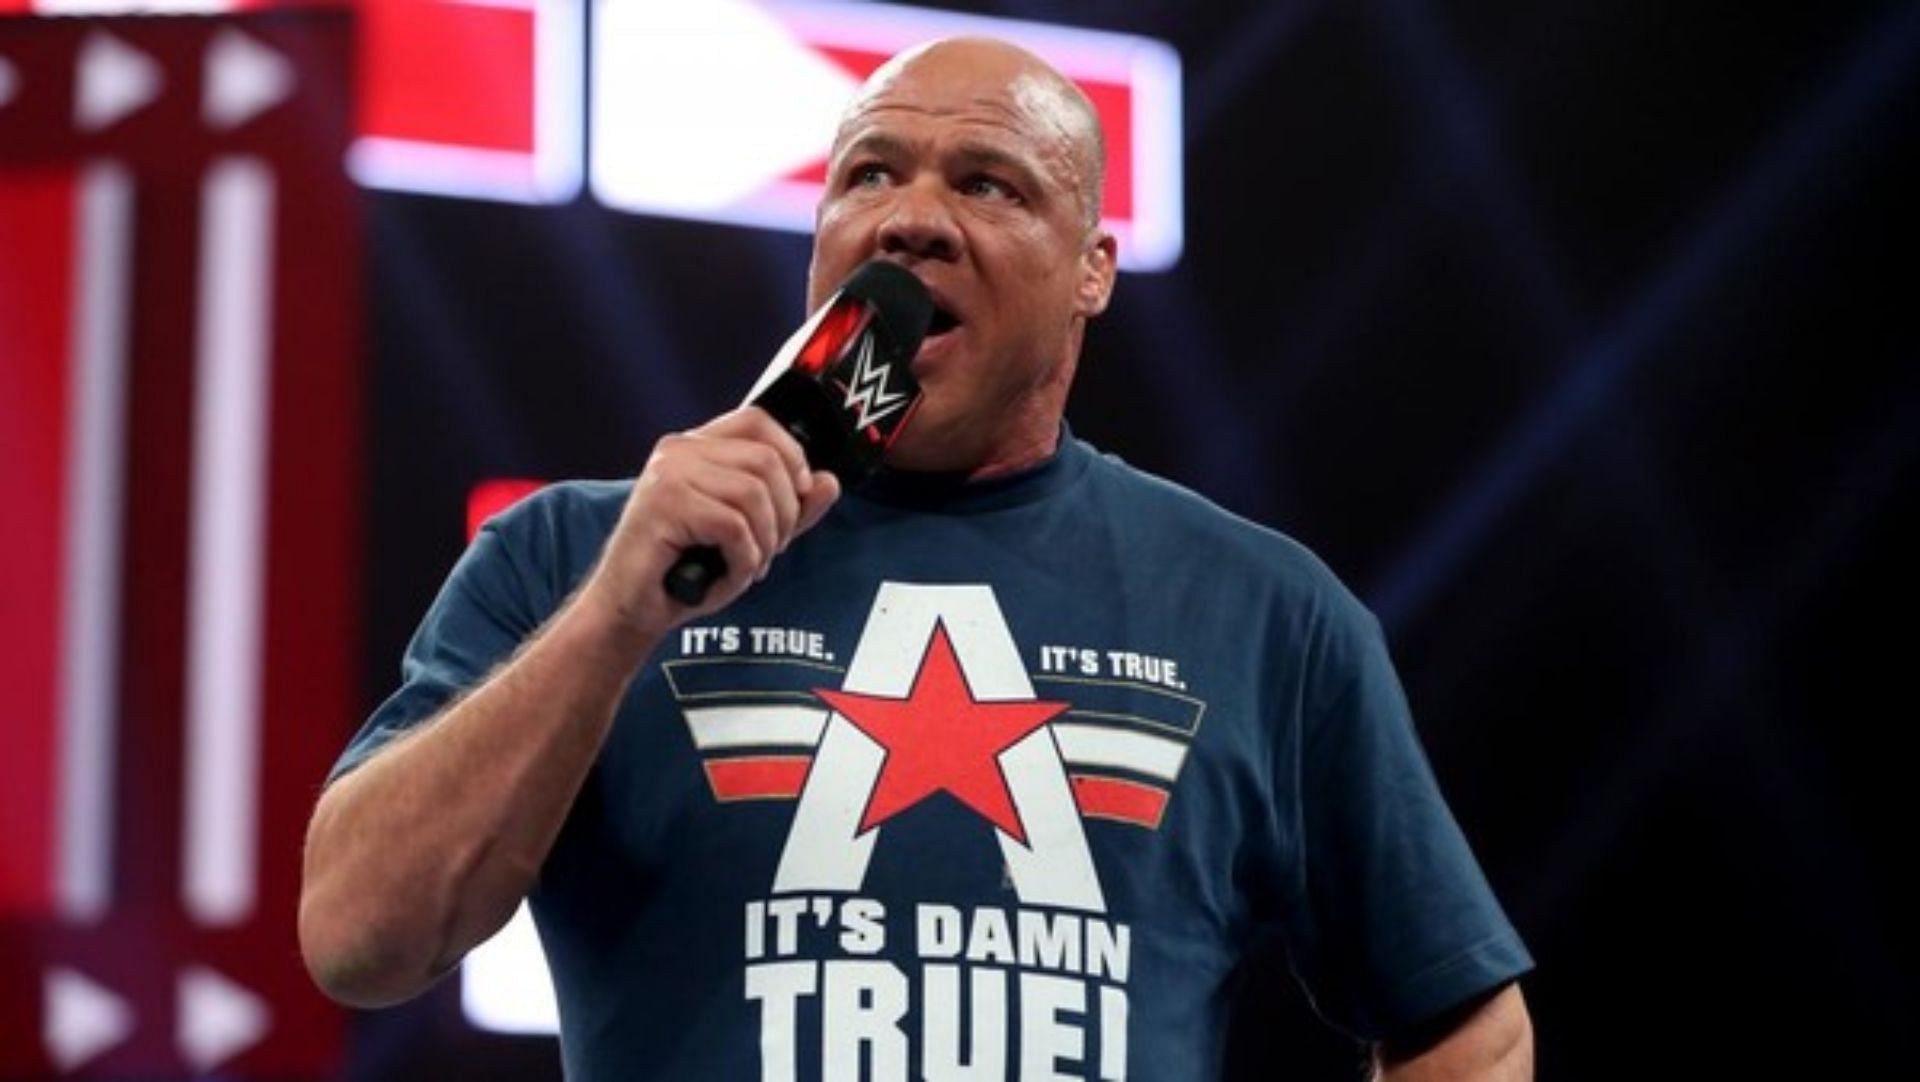 Kurt Angle excelled both on the mic and in the ring